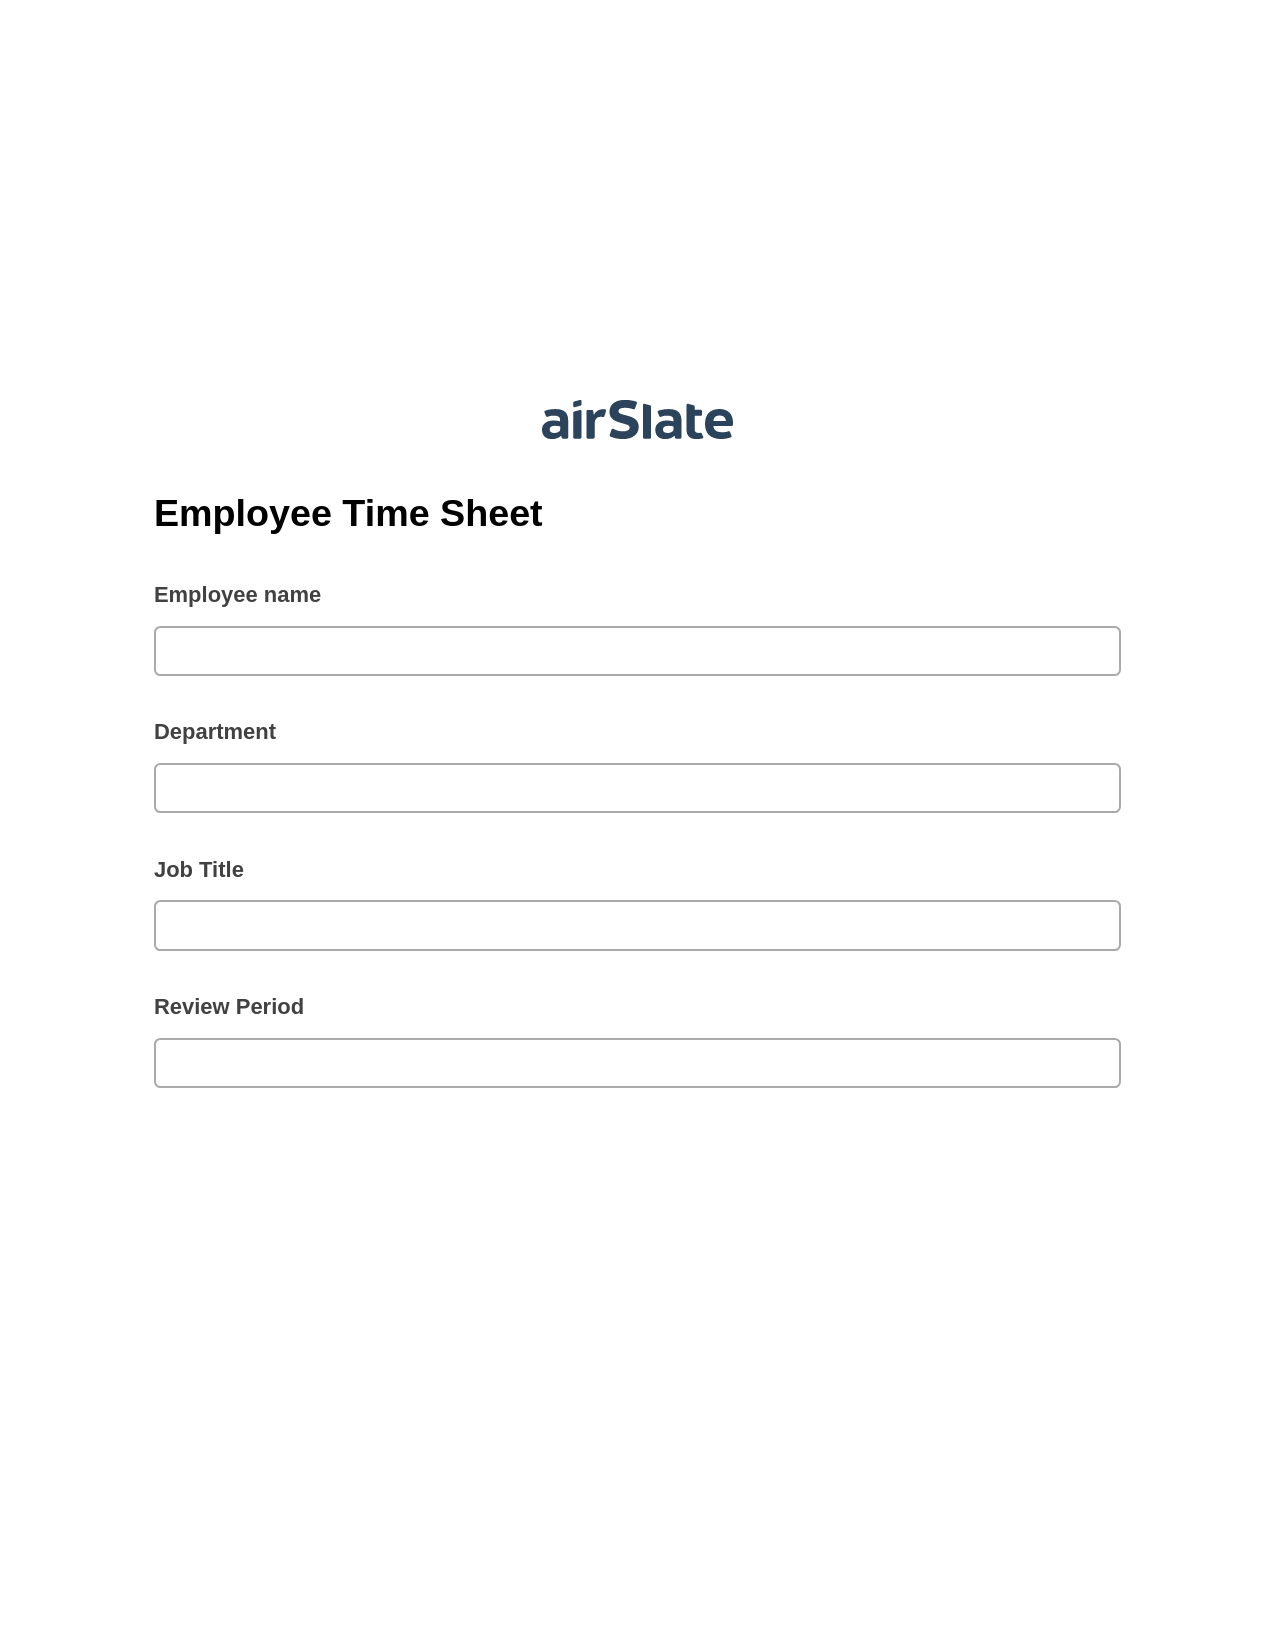 Employee Time Sheet Pre-fill from Salesforce Records Bot, Update Audit Trail Bot, Text Message Notification Postfinish Bot